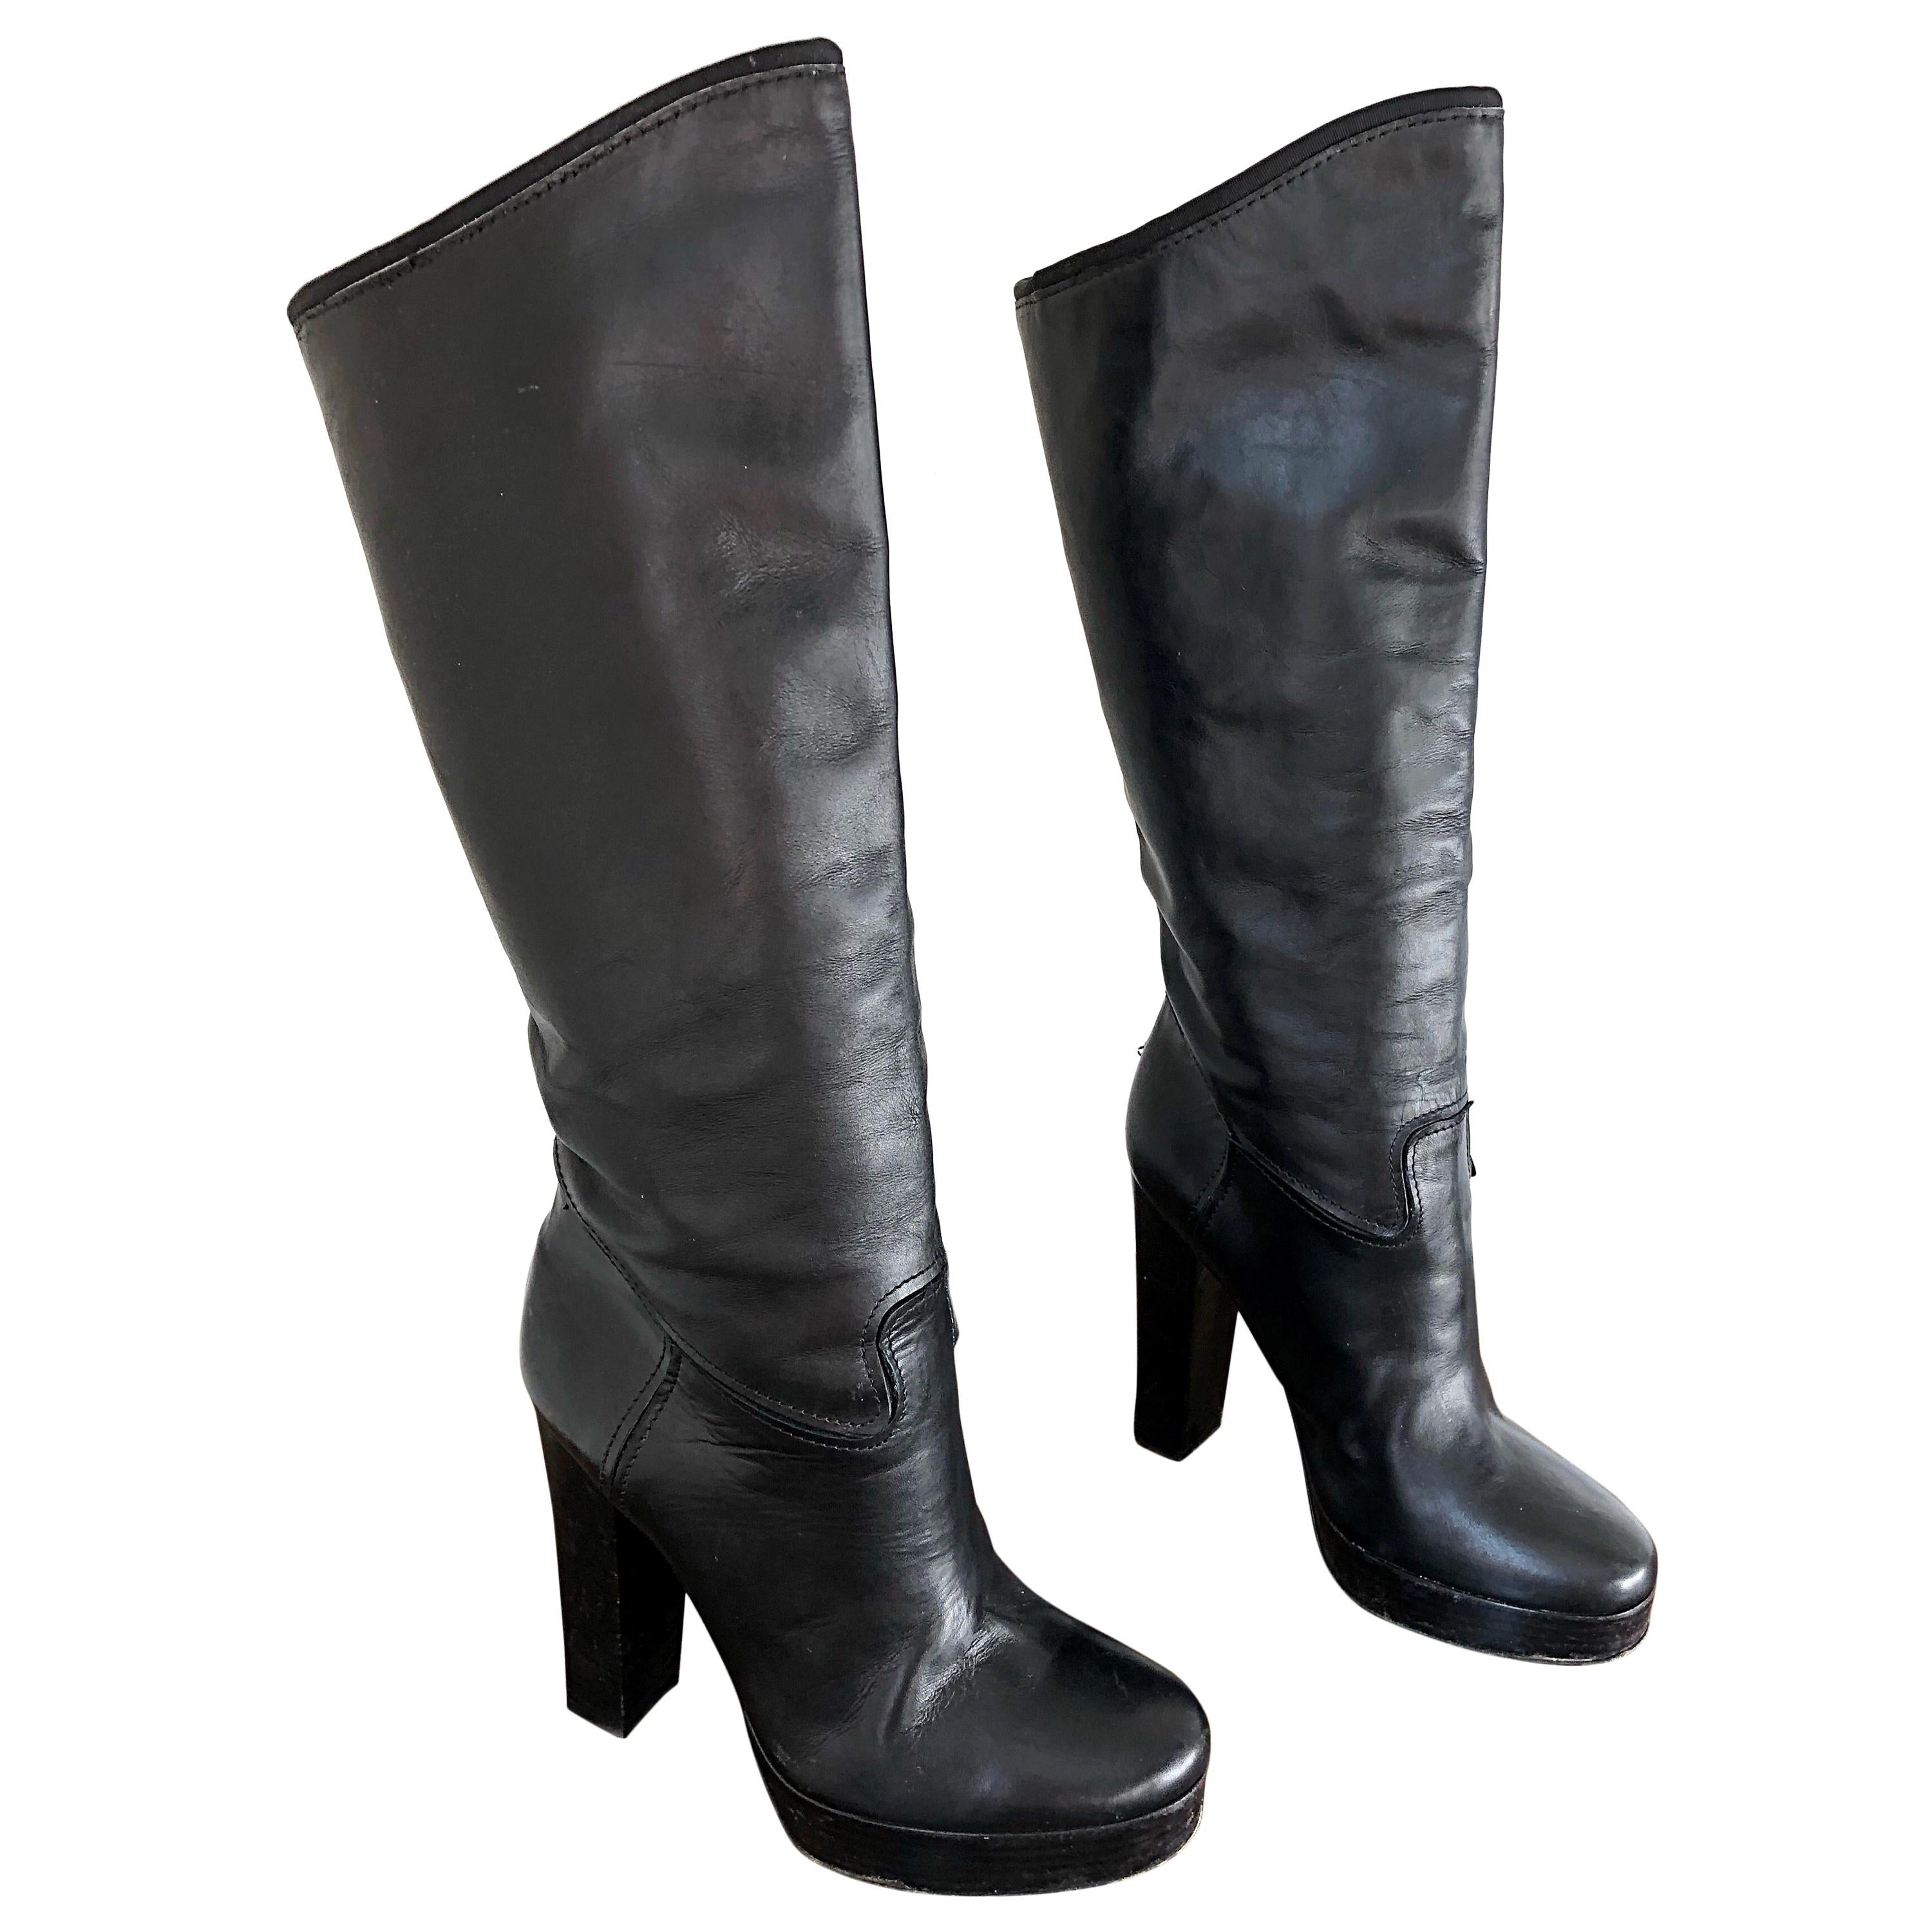 black leather knee high boots size 5